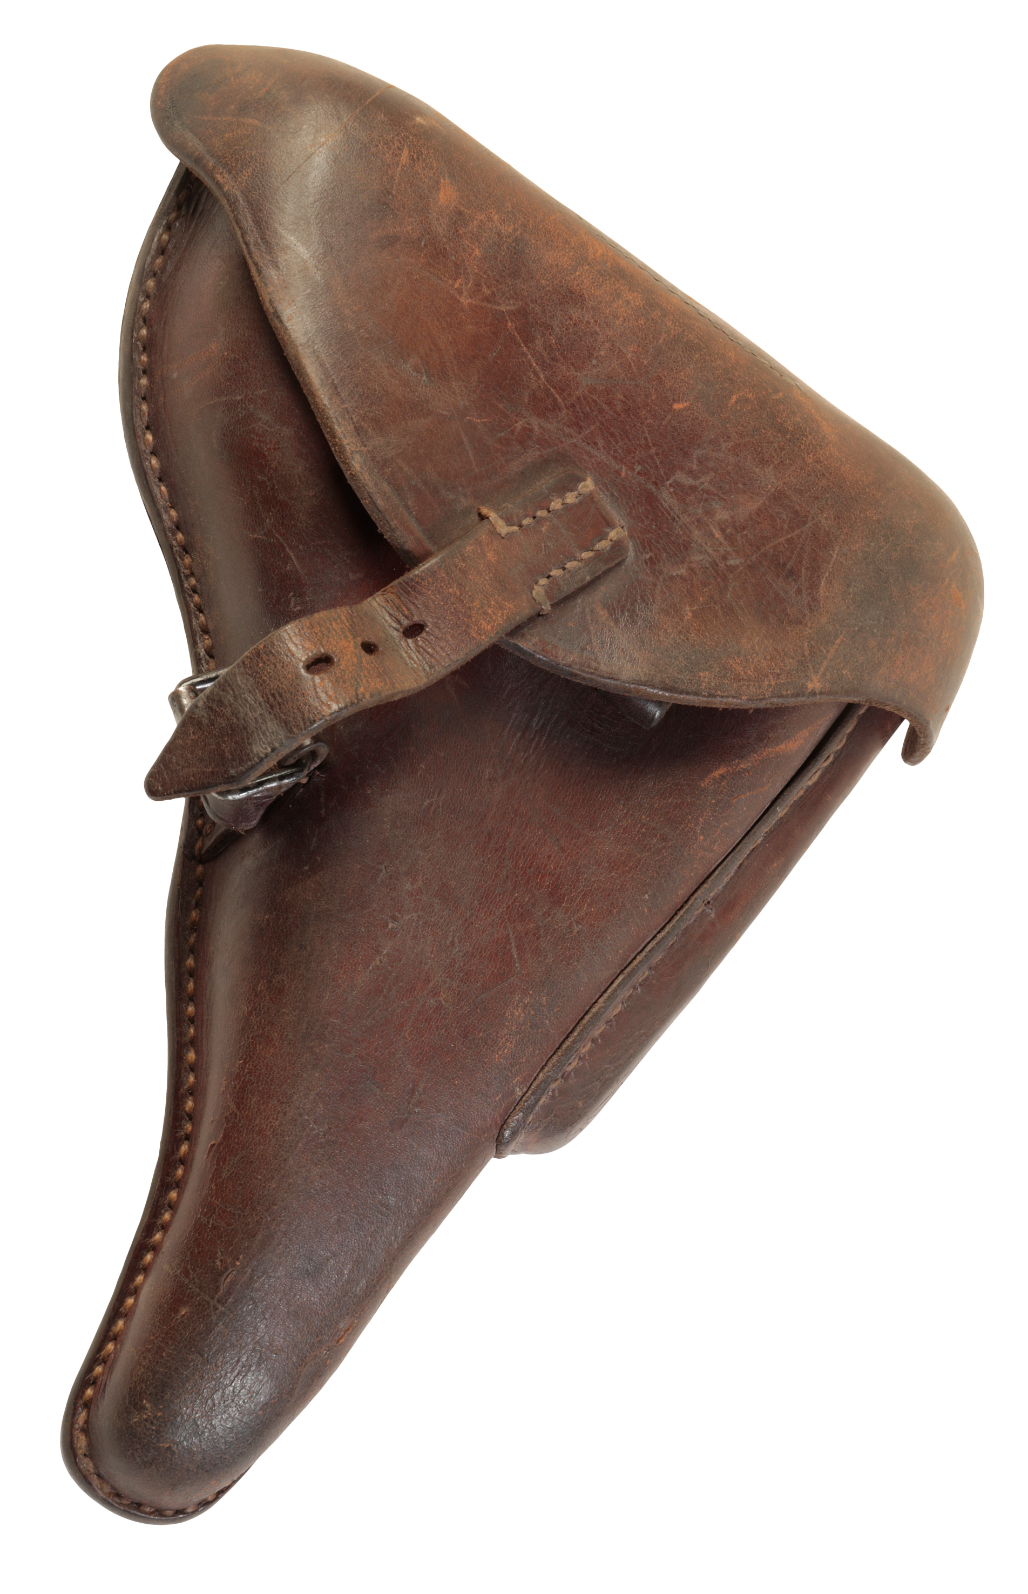 A WWII GERMAN LUGER PISTOL HOLSTER